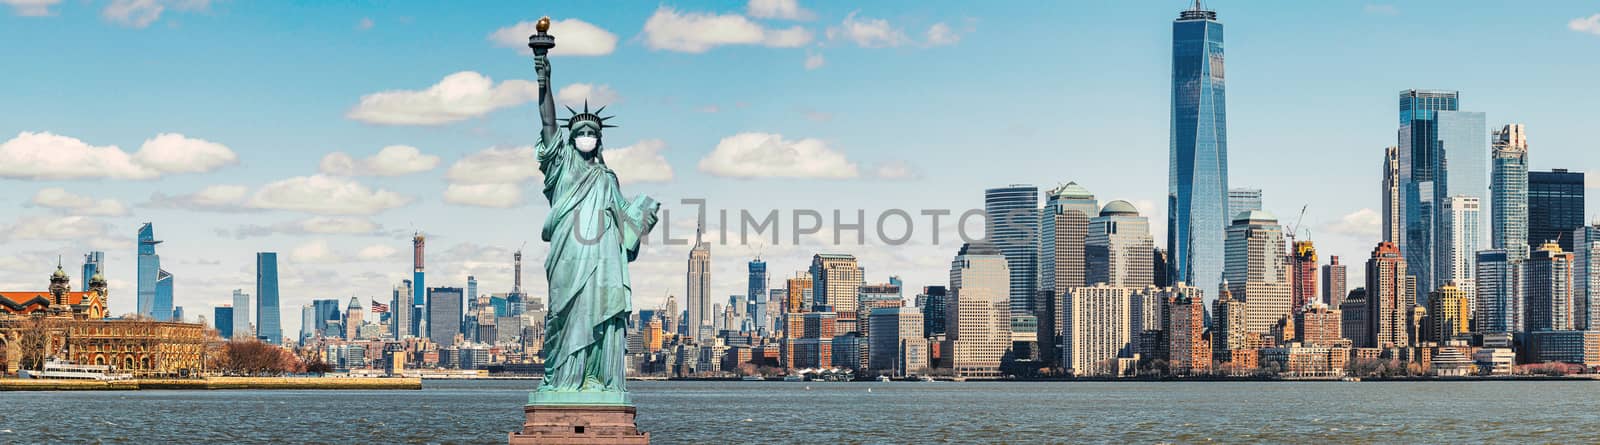 The Statue of Liberty wearing surgical mask when Covid-19 Outbre by Tzido